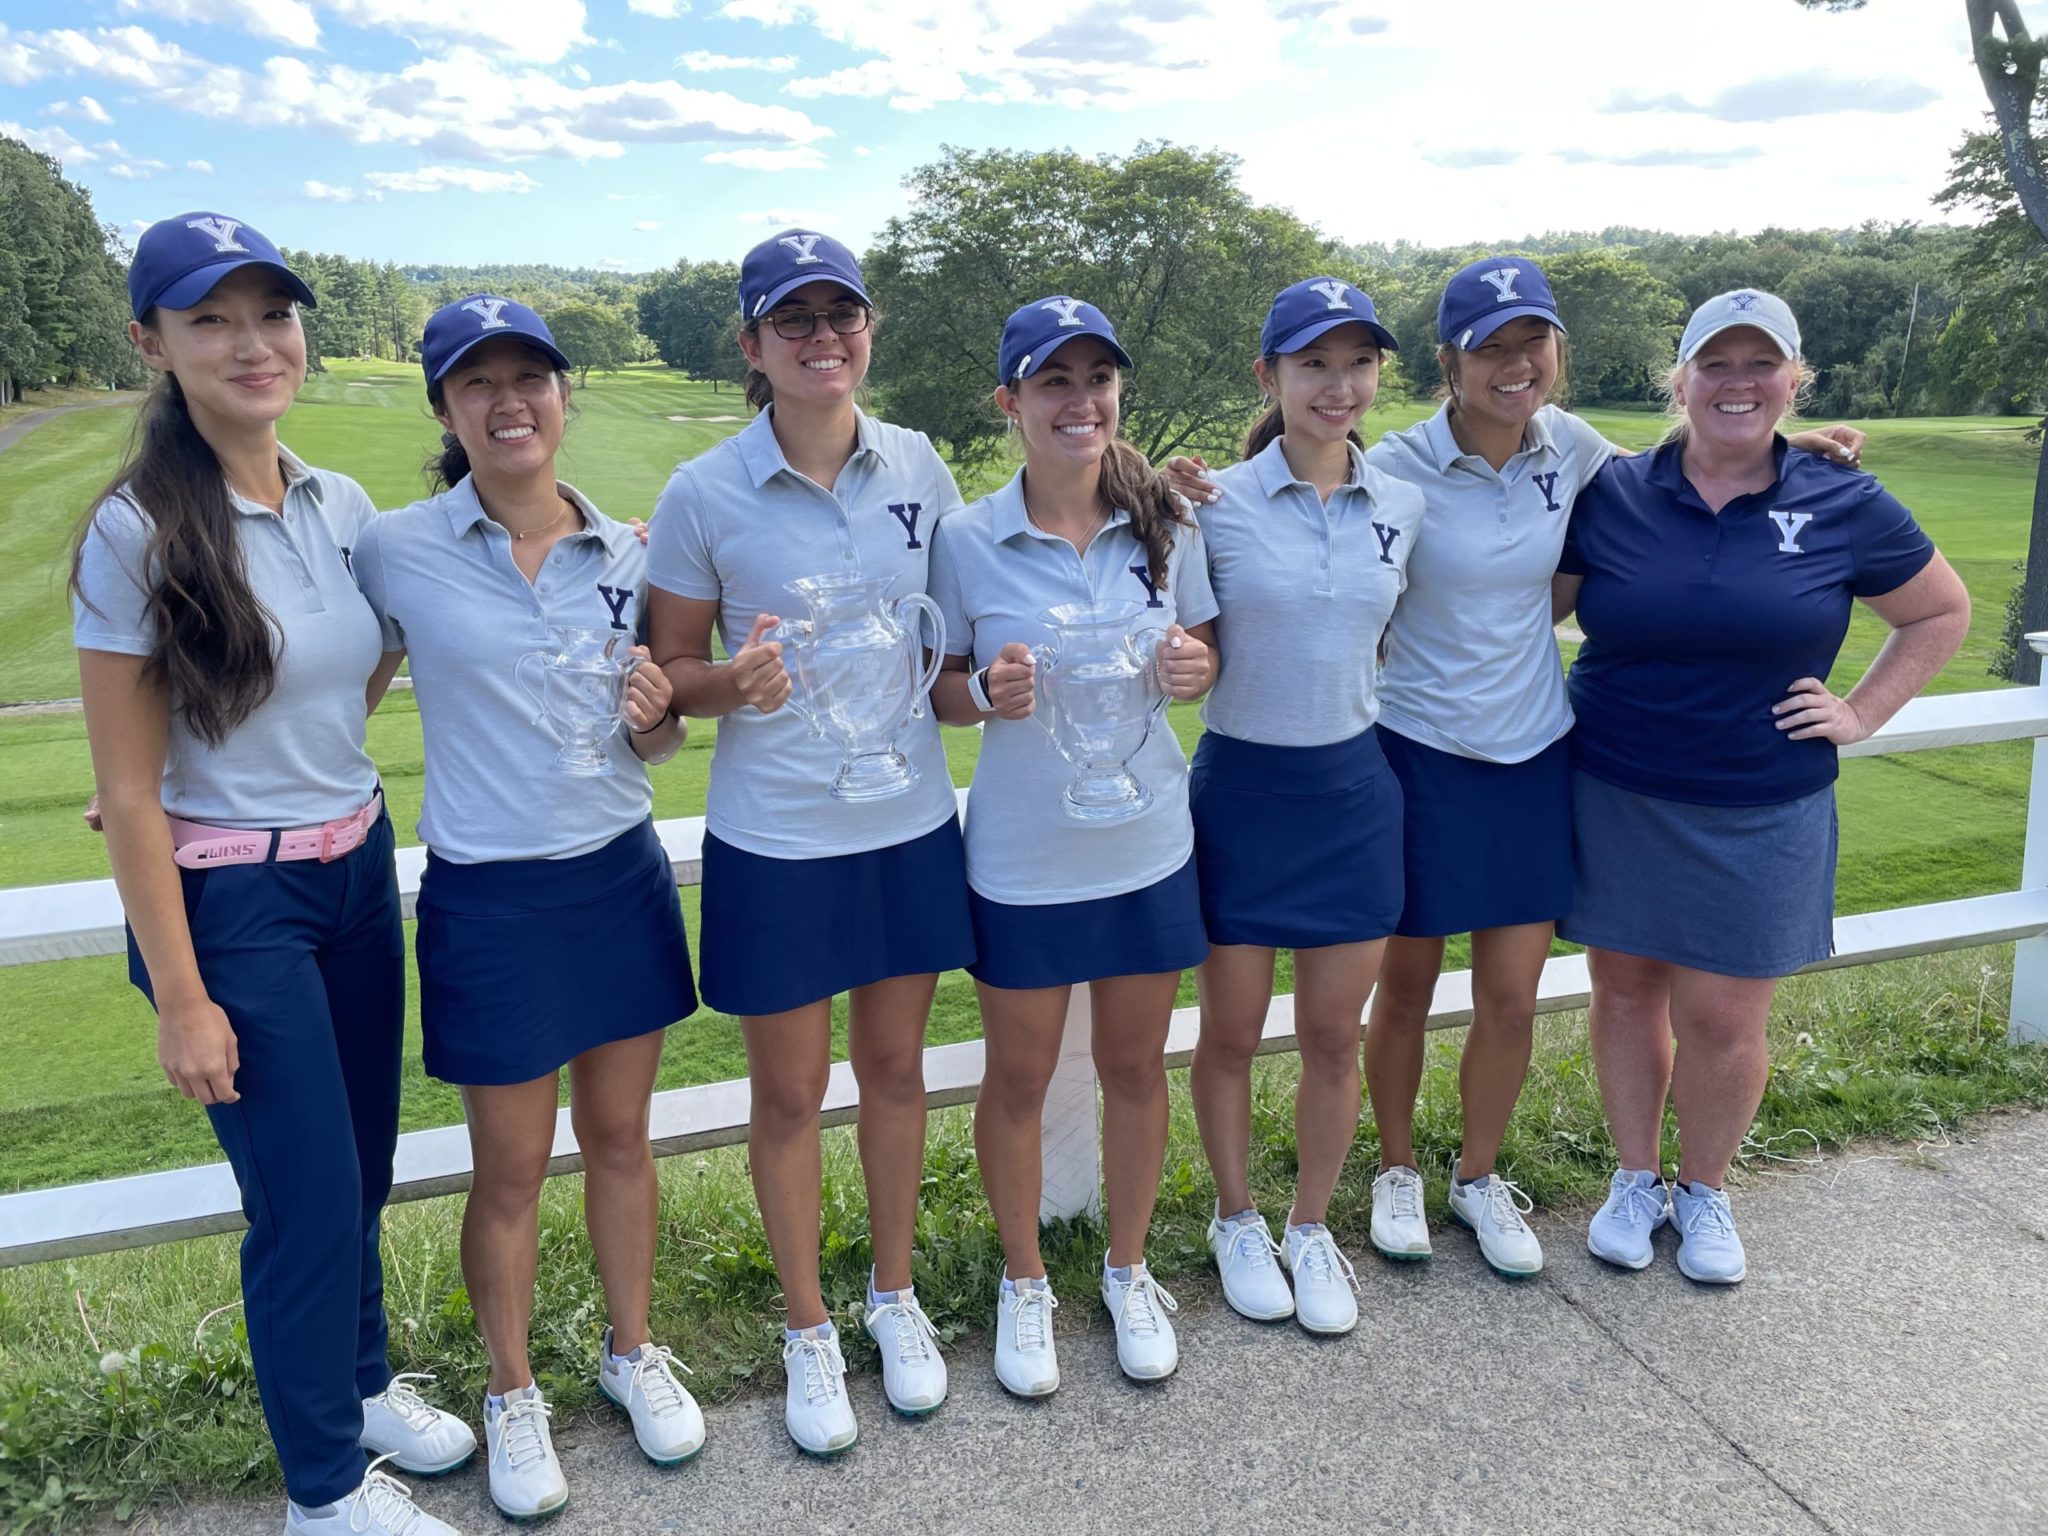 WOMEN'S GOLF: Elis looks to rebound in new season - Yale Daily News